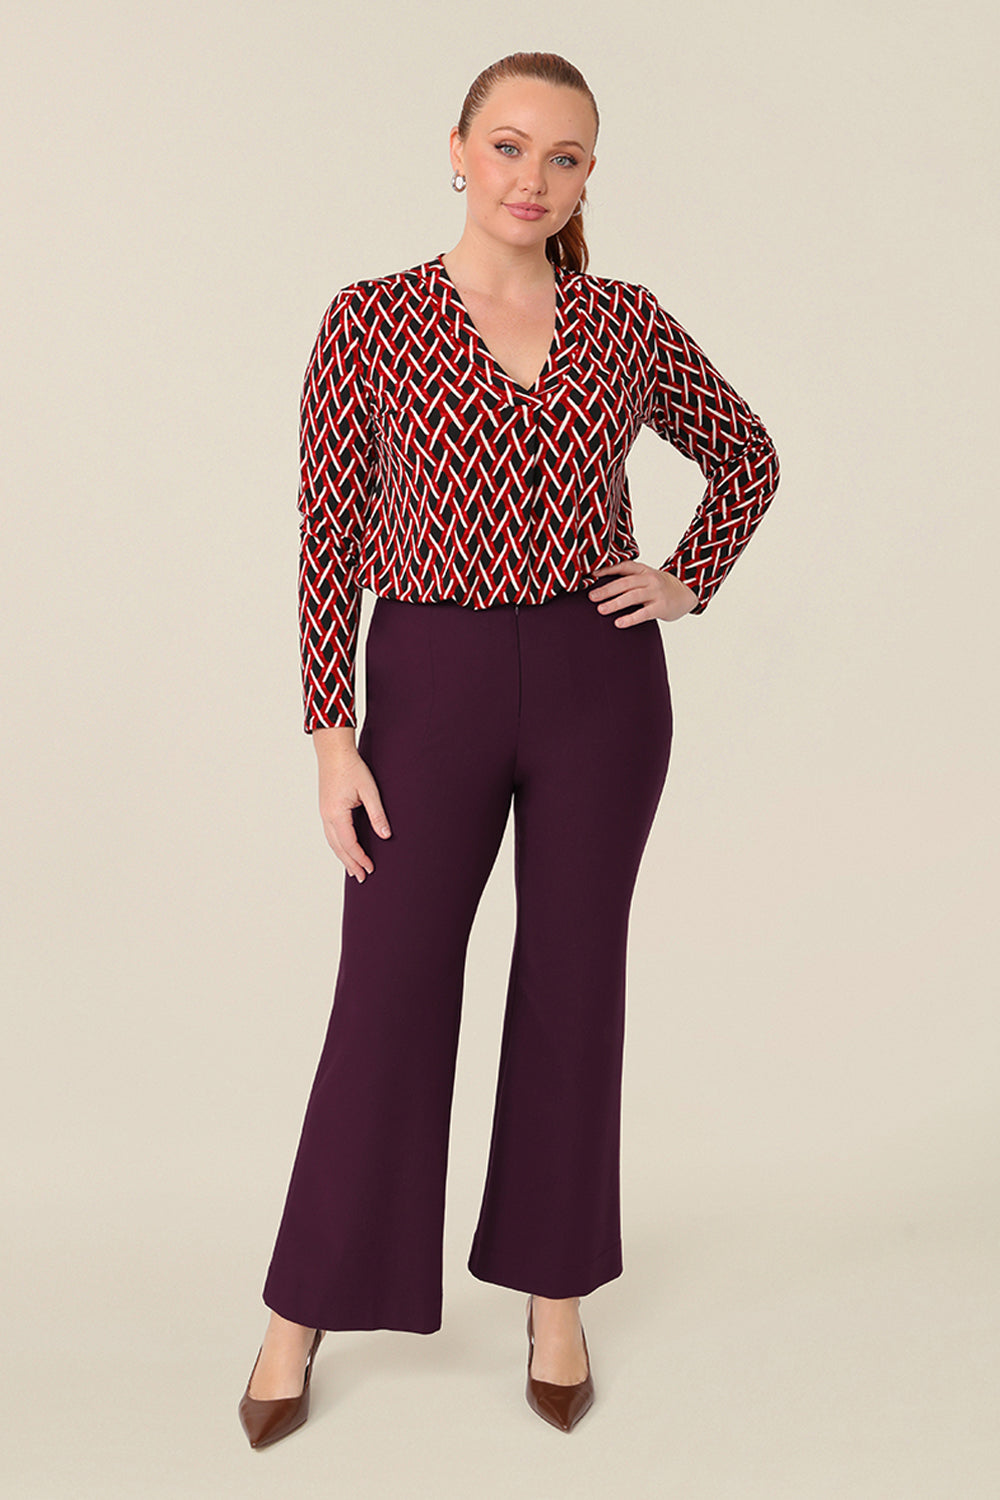 A long sleeve, women's work top, this red, white and black chevron print V-neck top has a shirttail hem. Worn with mulberry red tailored work pants with flared legs. Shop this office top at Australian fashion brand, L&F in petite to plus sizes.